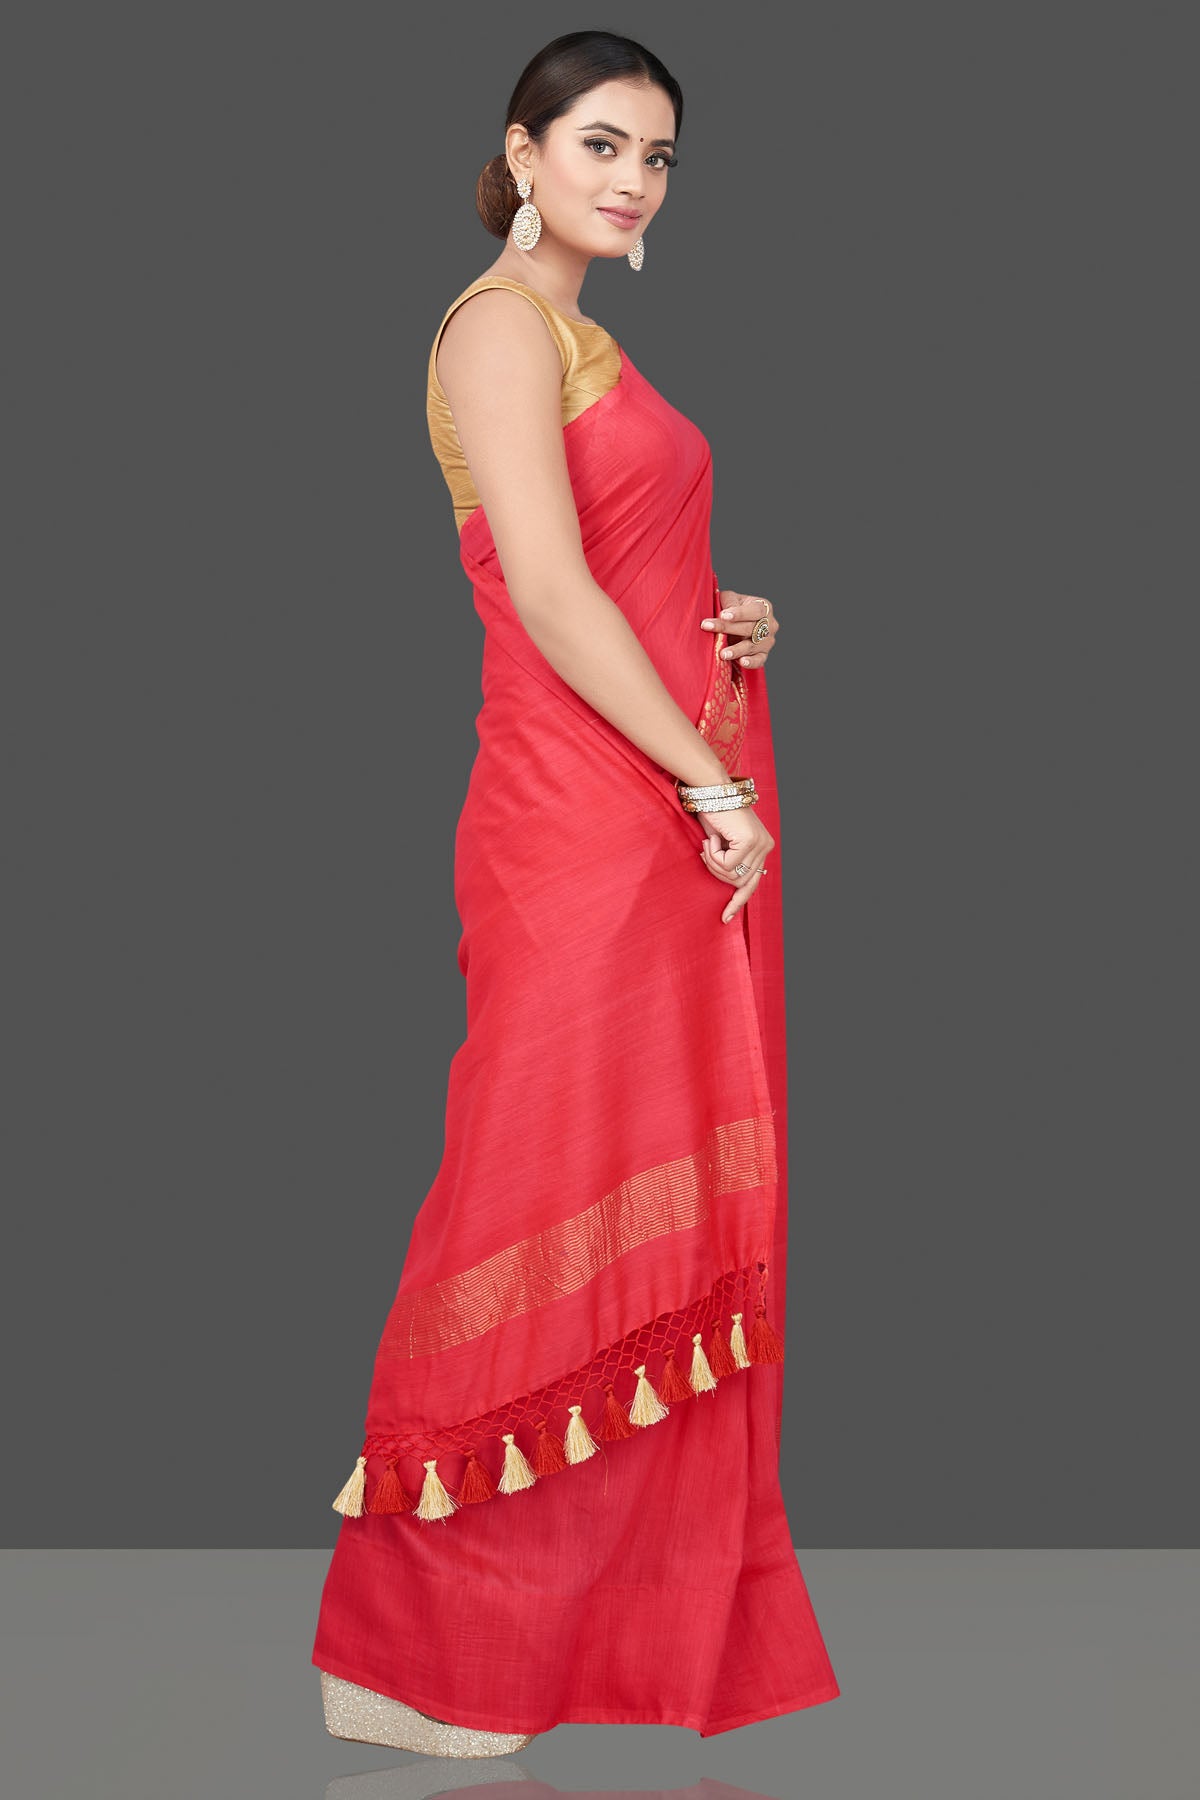 Buy beautiful tomato red Muga Banarasi saree online in USA with zari work. Get your hands on beautiful Indian handloom sarees, pure silk saris, designer sarees, embroidered sarees, Banarasi sarees from Pure Elegance Indian fashion store in USA.-side